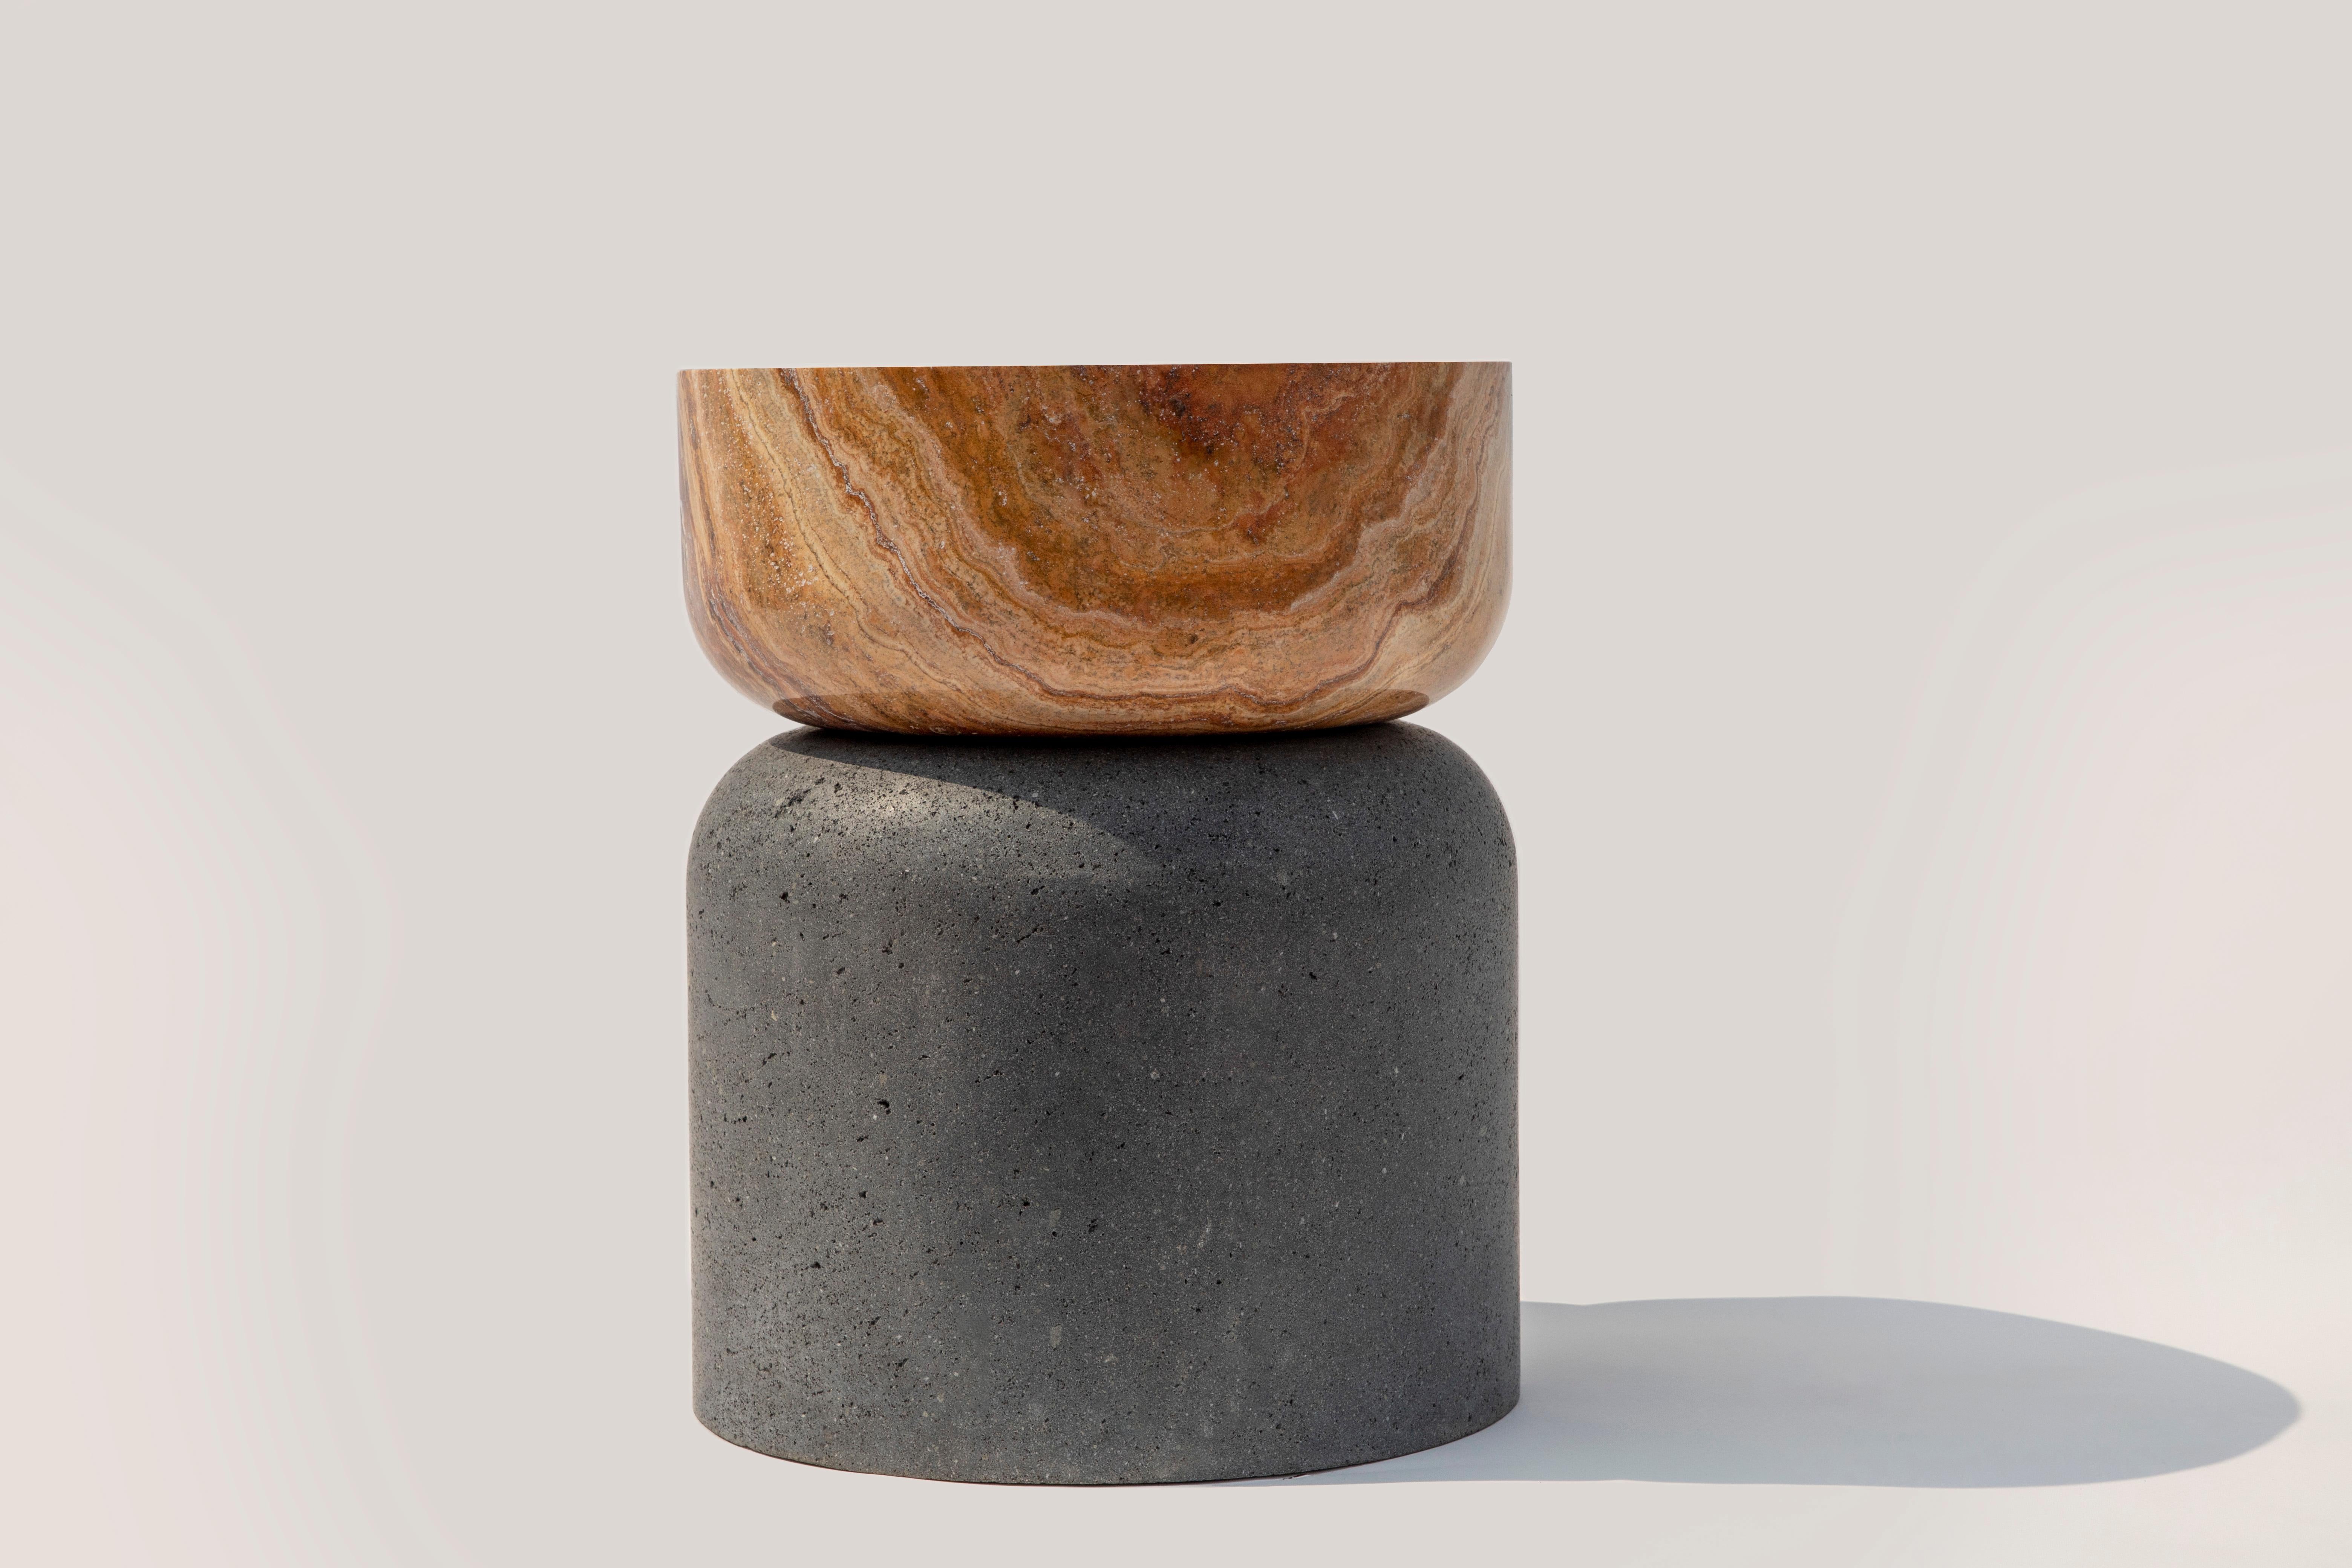 Organic Modern Volcanic Shade IV Stool/Table by Sten Studio, Represented by Tuleste Factory For Sale